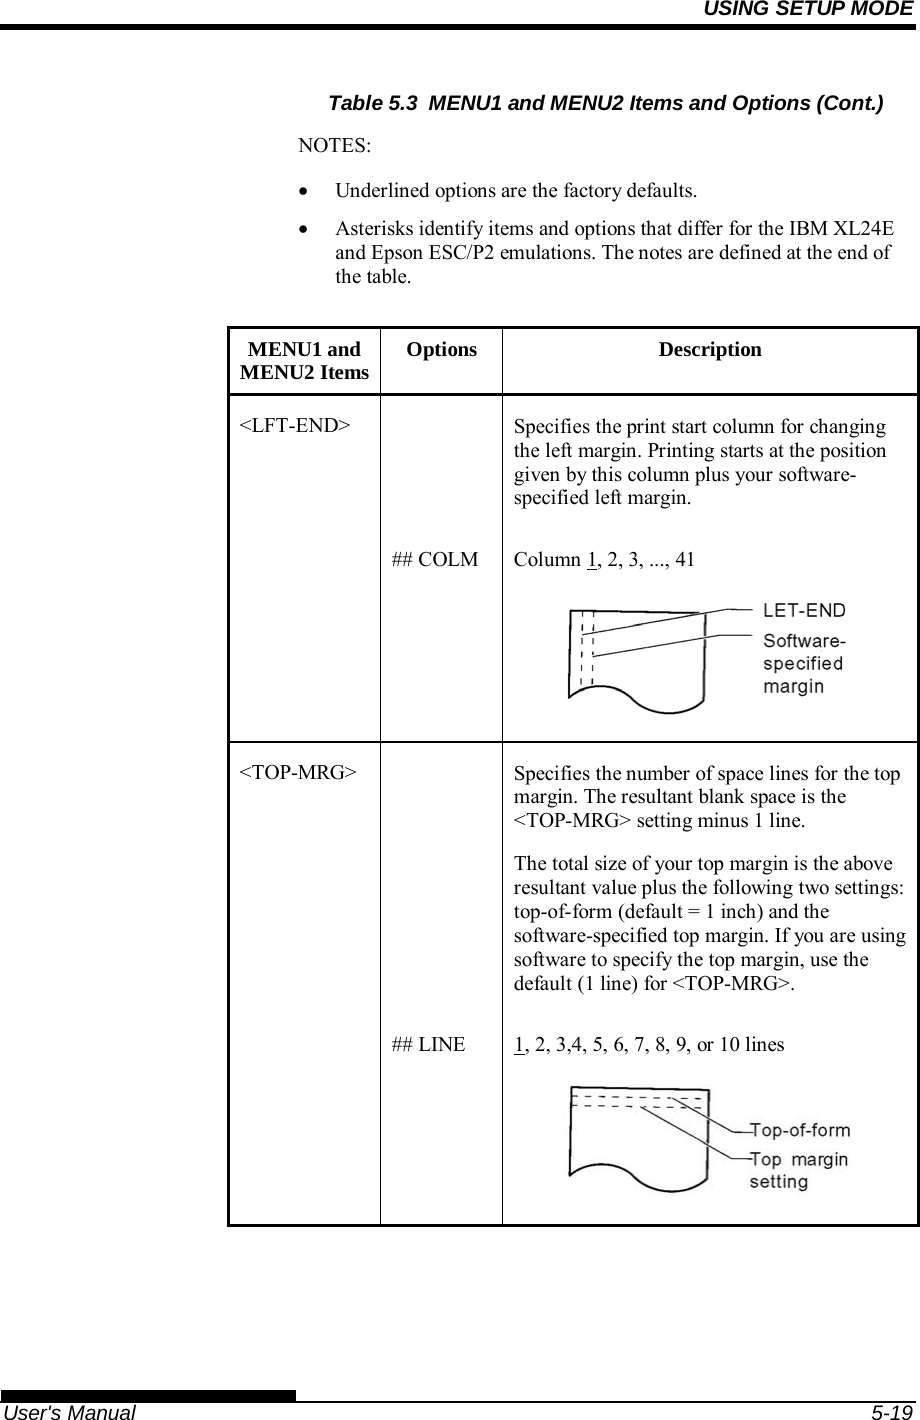 USING SETUP MODE   User&apos;s Manual  5-19 Table 5.3  MENU1 and MENU2 Items and Options (Cont.) NOTES:  Underlined options are the factory defaults.  Asterisks identify items and options that differ for the IBM XL24E and Epson ESC/P2 emulations. The notes are defined at the end of the table.  MENU1 and MENU2 Items Options Description &lt;LFT-END&gt;   Specifies the print start column for changing the left margin. Printing starts at the position given by this column plus your software-specified left margin.   ## COLM  Column 1, 2, 3, ..., 41  &lt;TOP-MRG&gt;   Specifies the number of space lines for the top margin. The resultant blank space is the &lt;TOP-MRG&gt; setting minus 1 line. The total size of your top margin is the above resultant value plus the following two settings: top-of-form (default = 1 inch) and the software-specified top margin. If you are using software to specify the top margin, use the default (1 line) for &lt;TOP-MRG&gt;.   ## LINE  1, 2, 3,4, 5, 6, 7, 8, 9, or 10 lines   